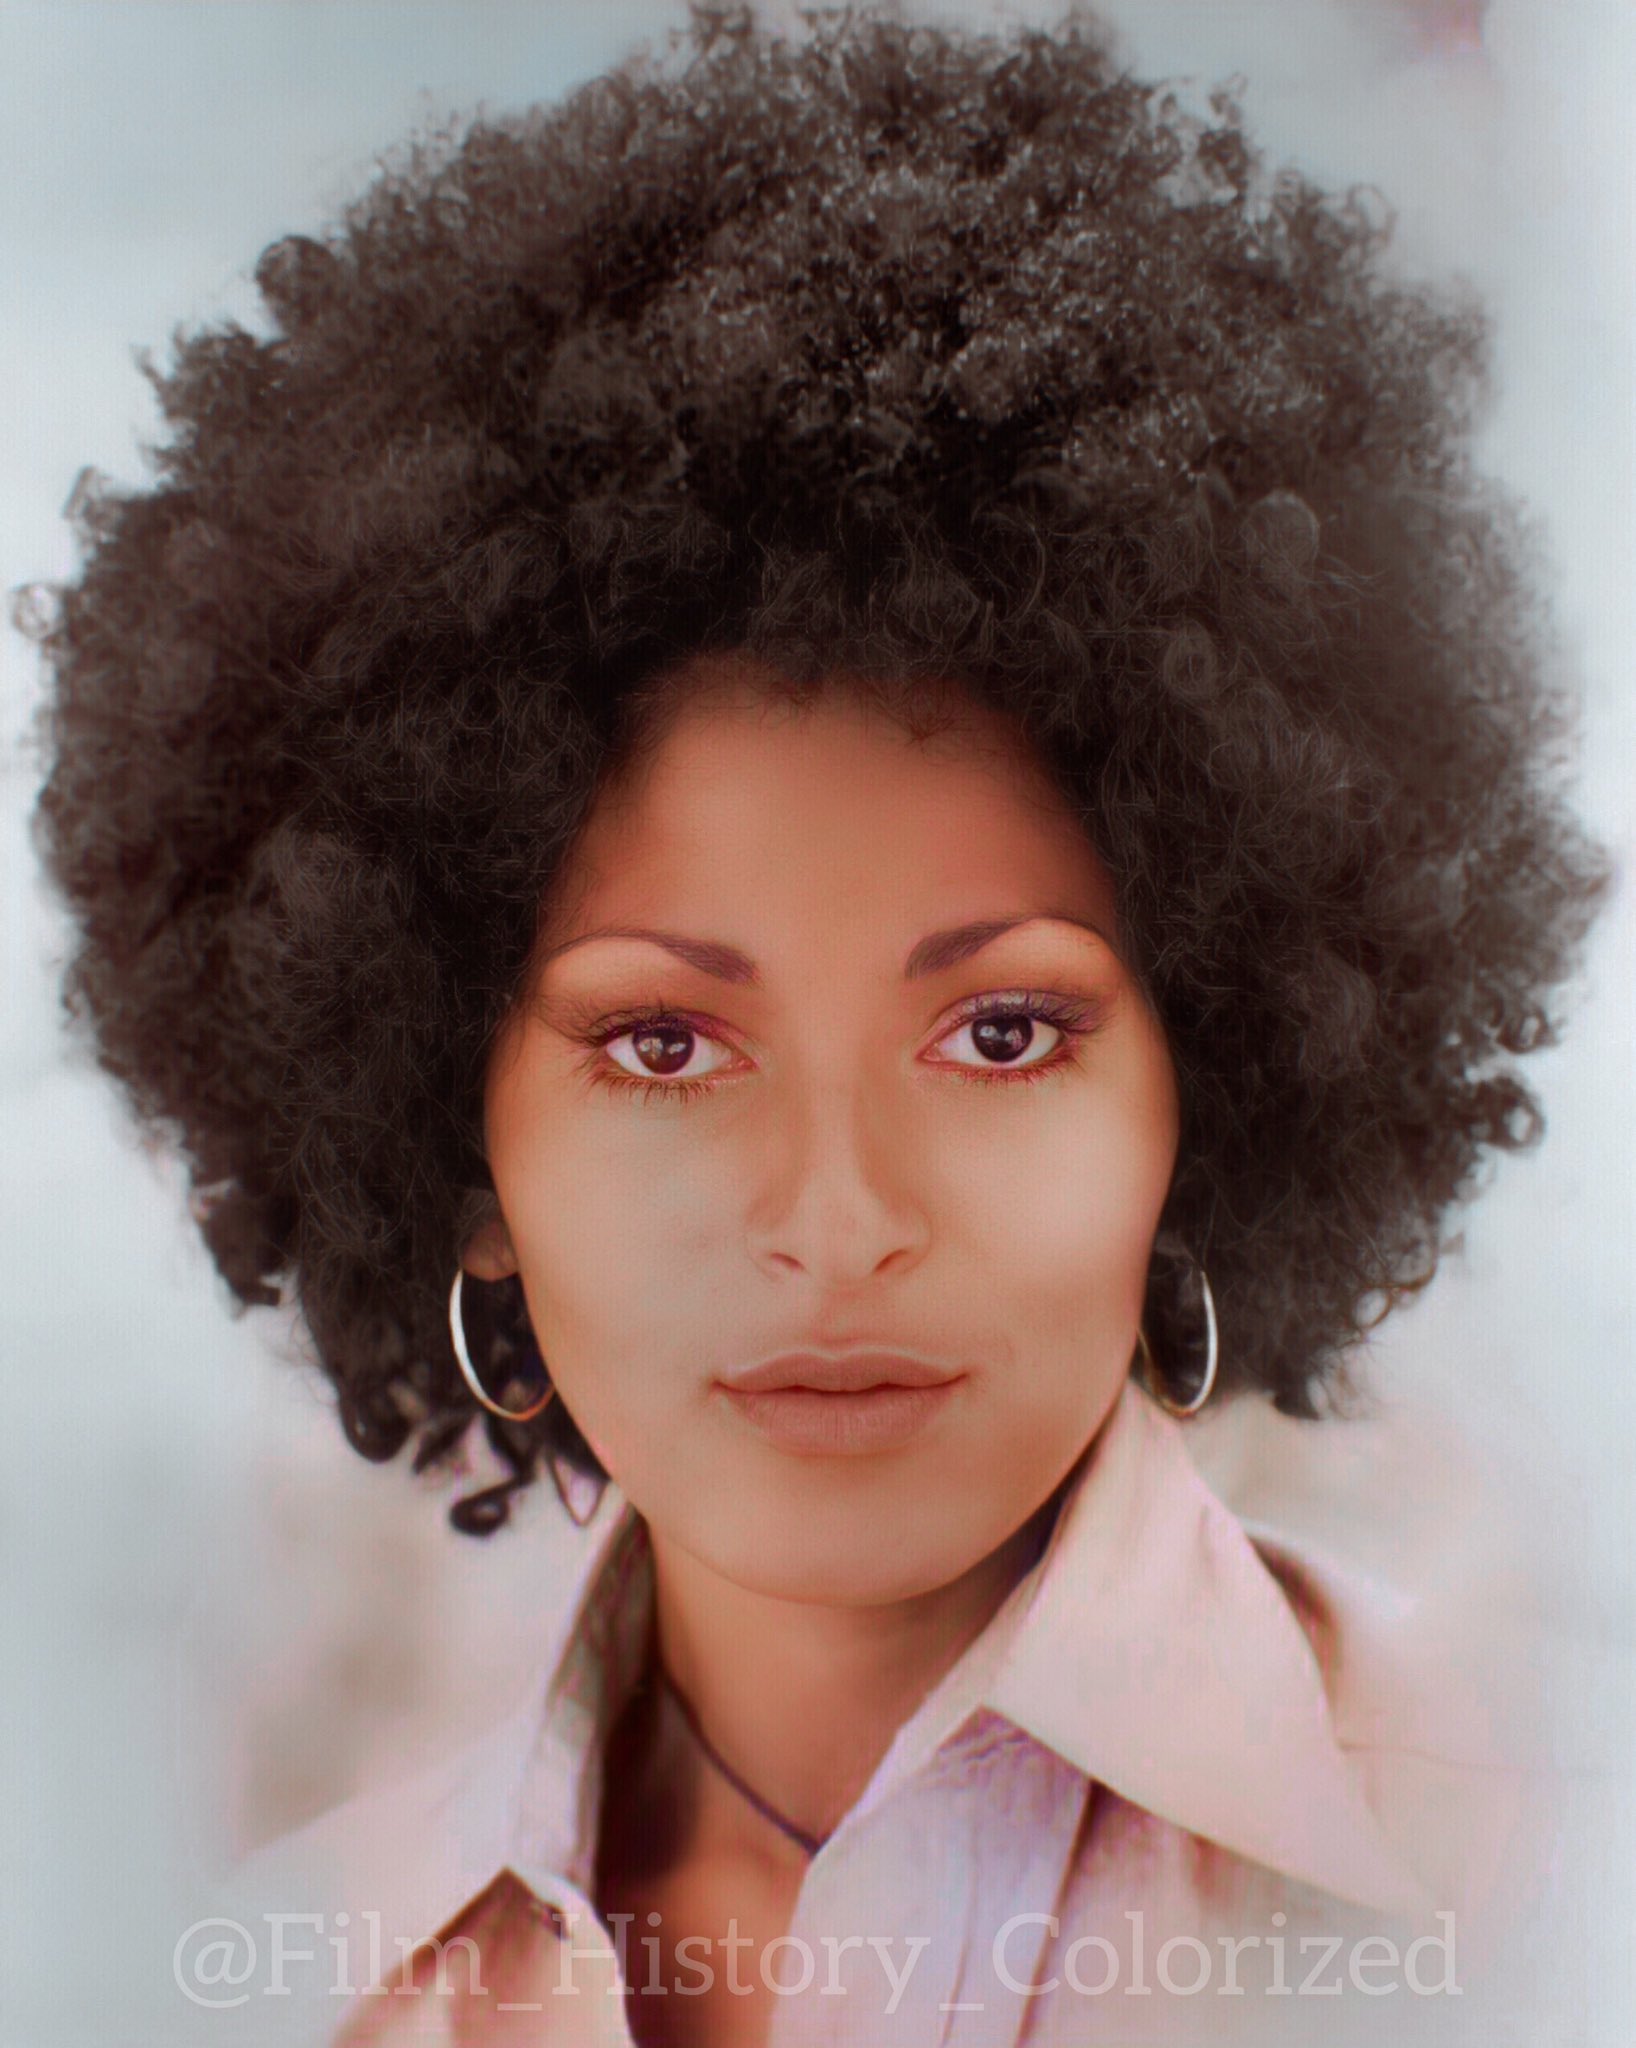 Happy birthday to the Blaxploitation Queen, Pam Grier! 

(Colorized by yours truly) 